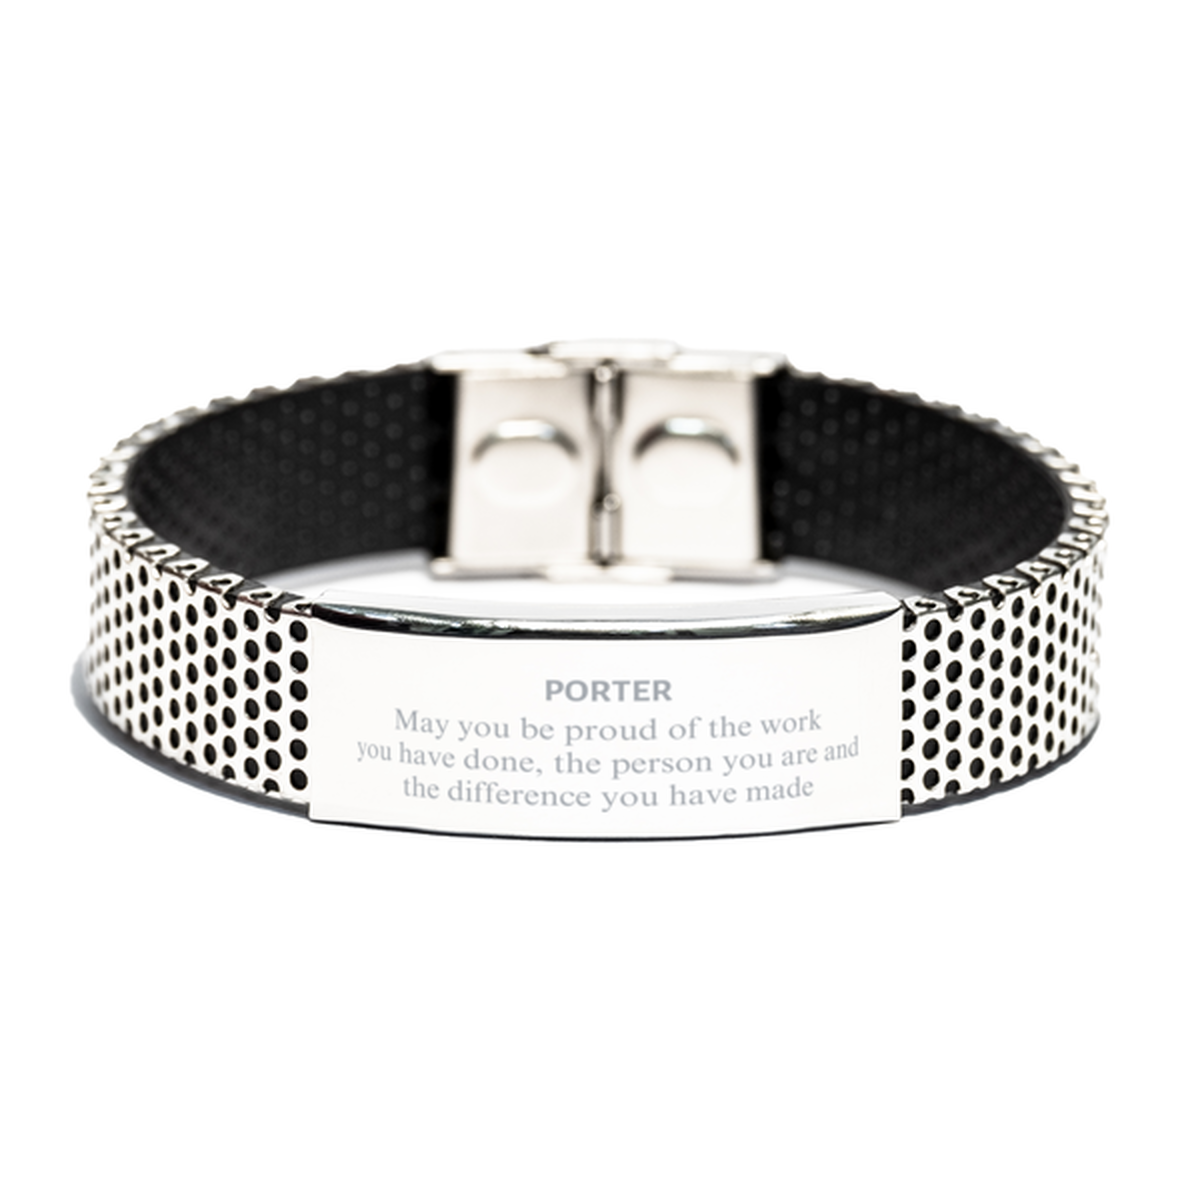 Porter May you be proud of the work you have done, Retirement Porter Stainless Steel Bracelet for Colleague Appreciation Gifts Amazing for Porter